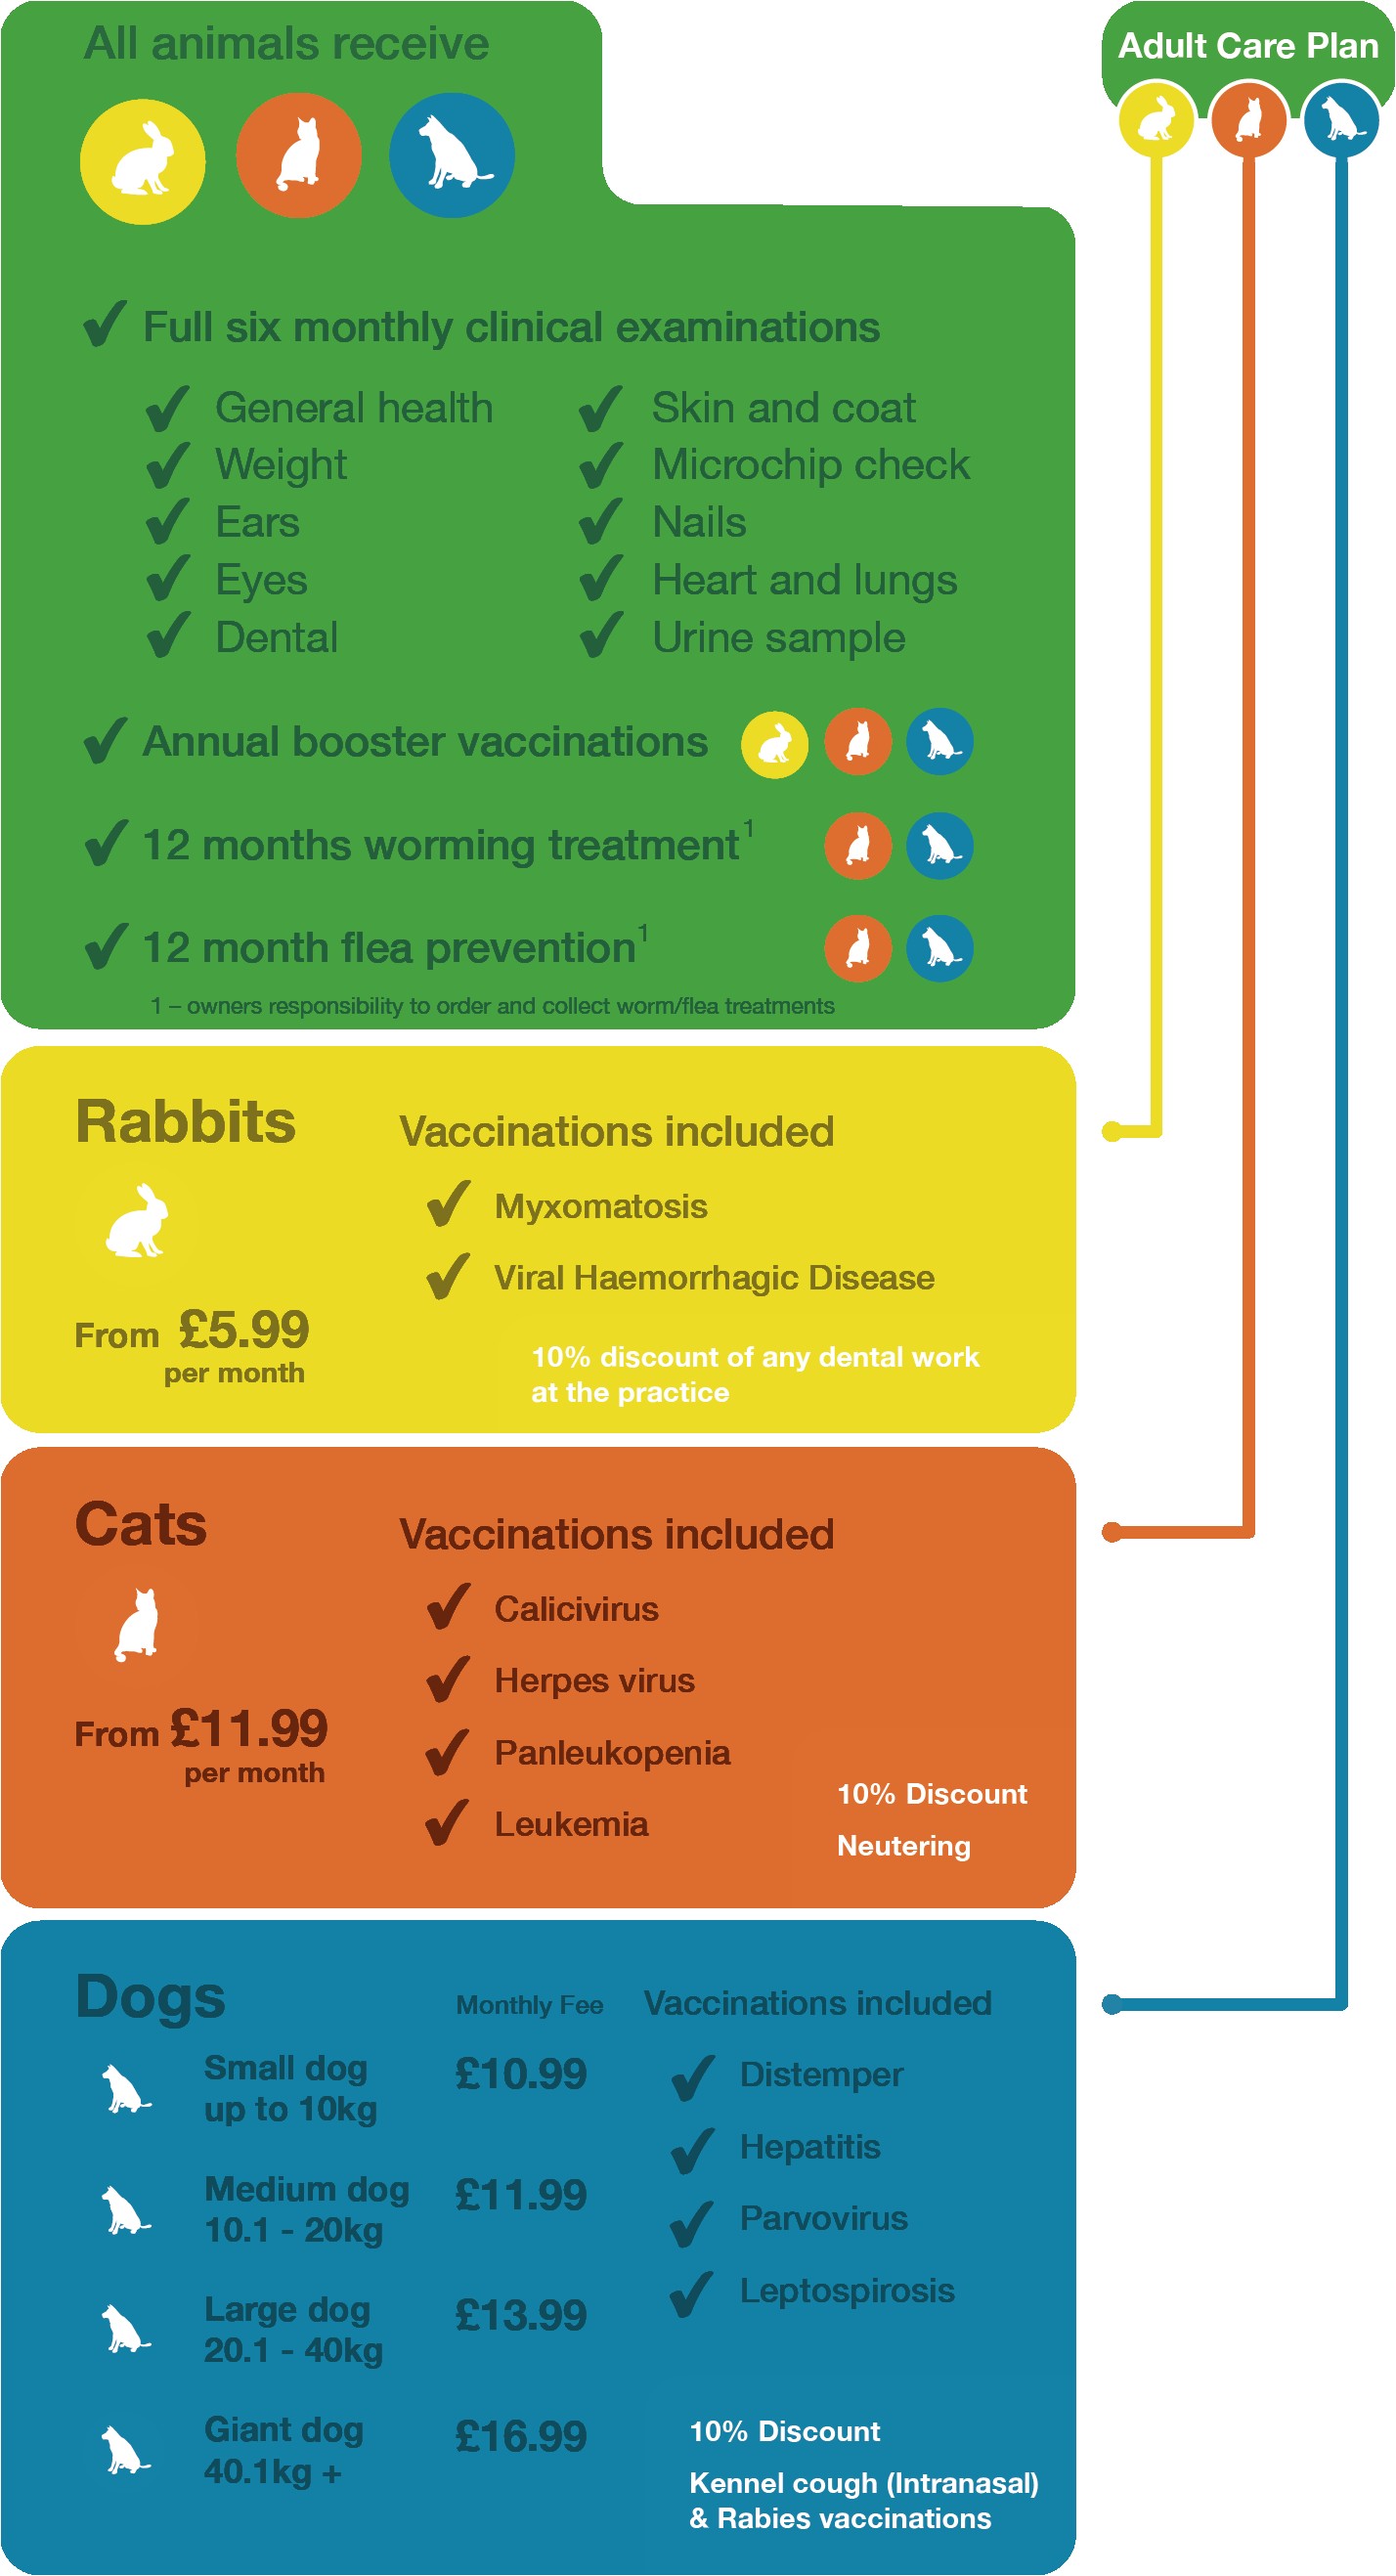 Pets at Home Pet Care Plan Adult Pet Care Plan Tay Valley Vets Veterinary